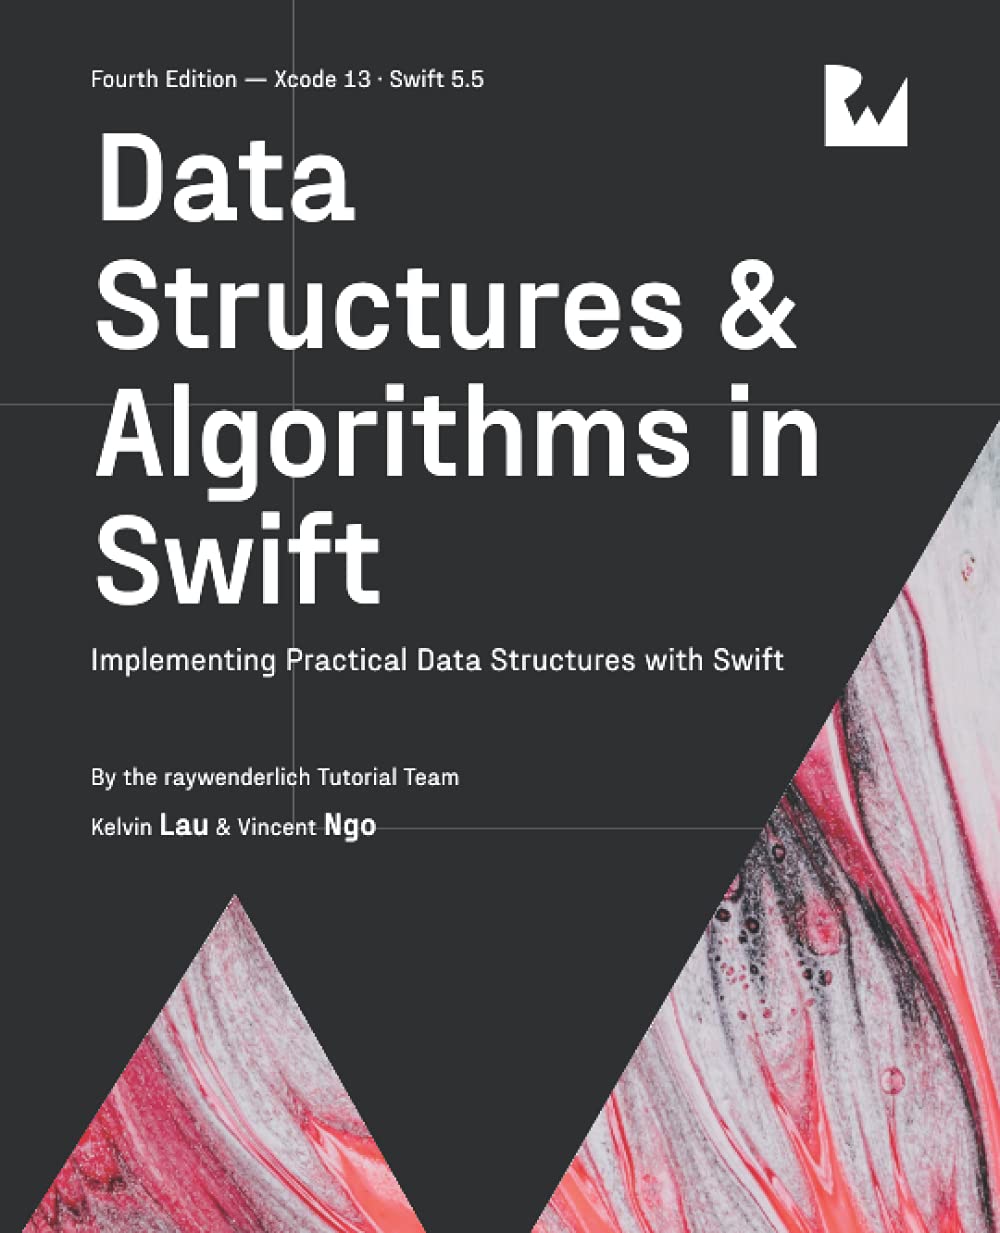 (EBook PDF)Data Structures ＆amp; Algorithms in Swift, 4th Edition: Implementing Practical Data Structures with Swift by raywenderlich Tutorial Team, Kelvin Lau, Vincent Ngo